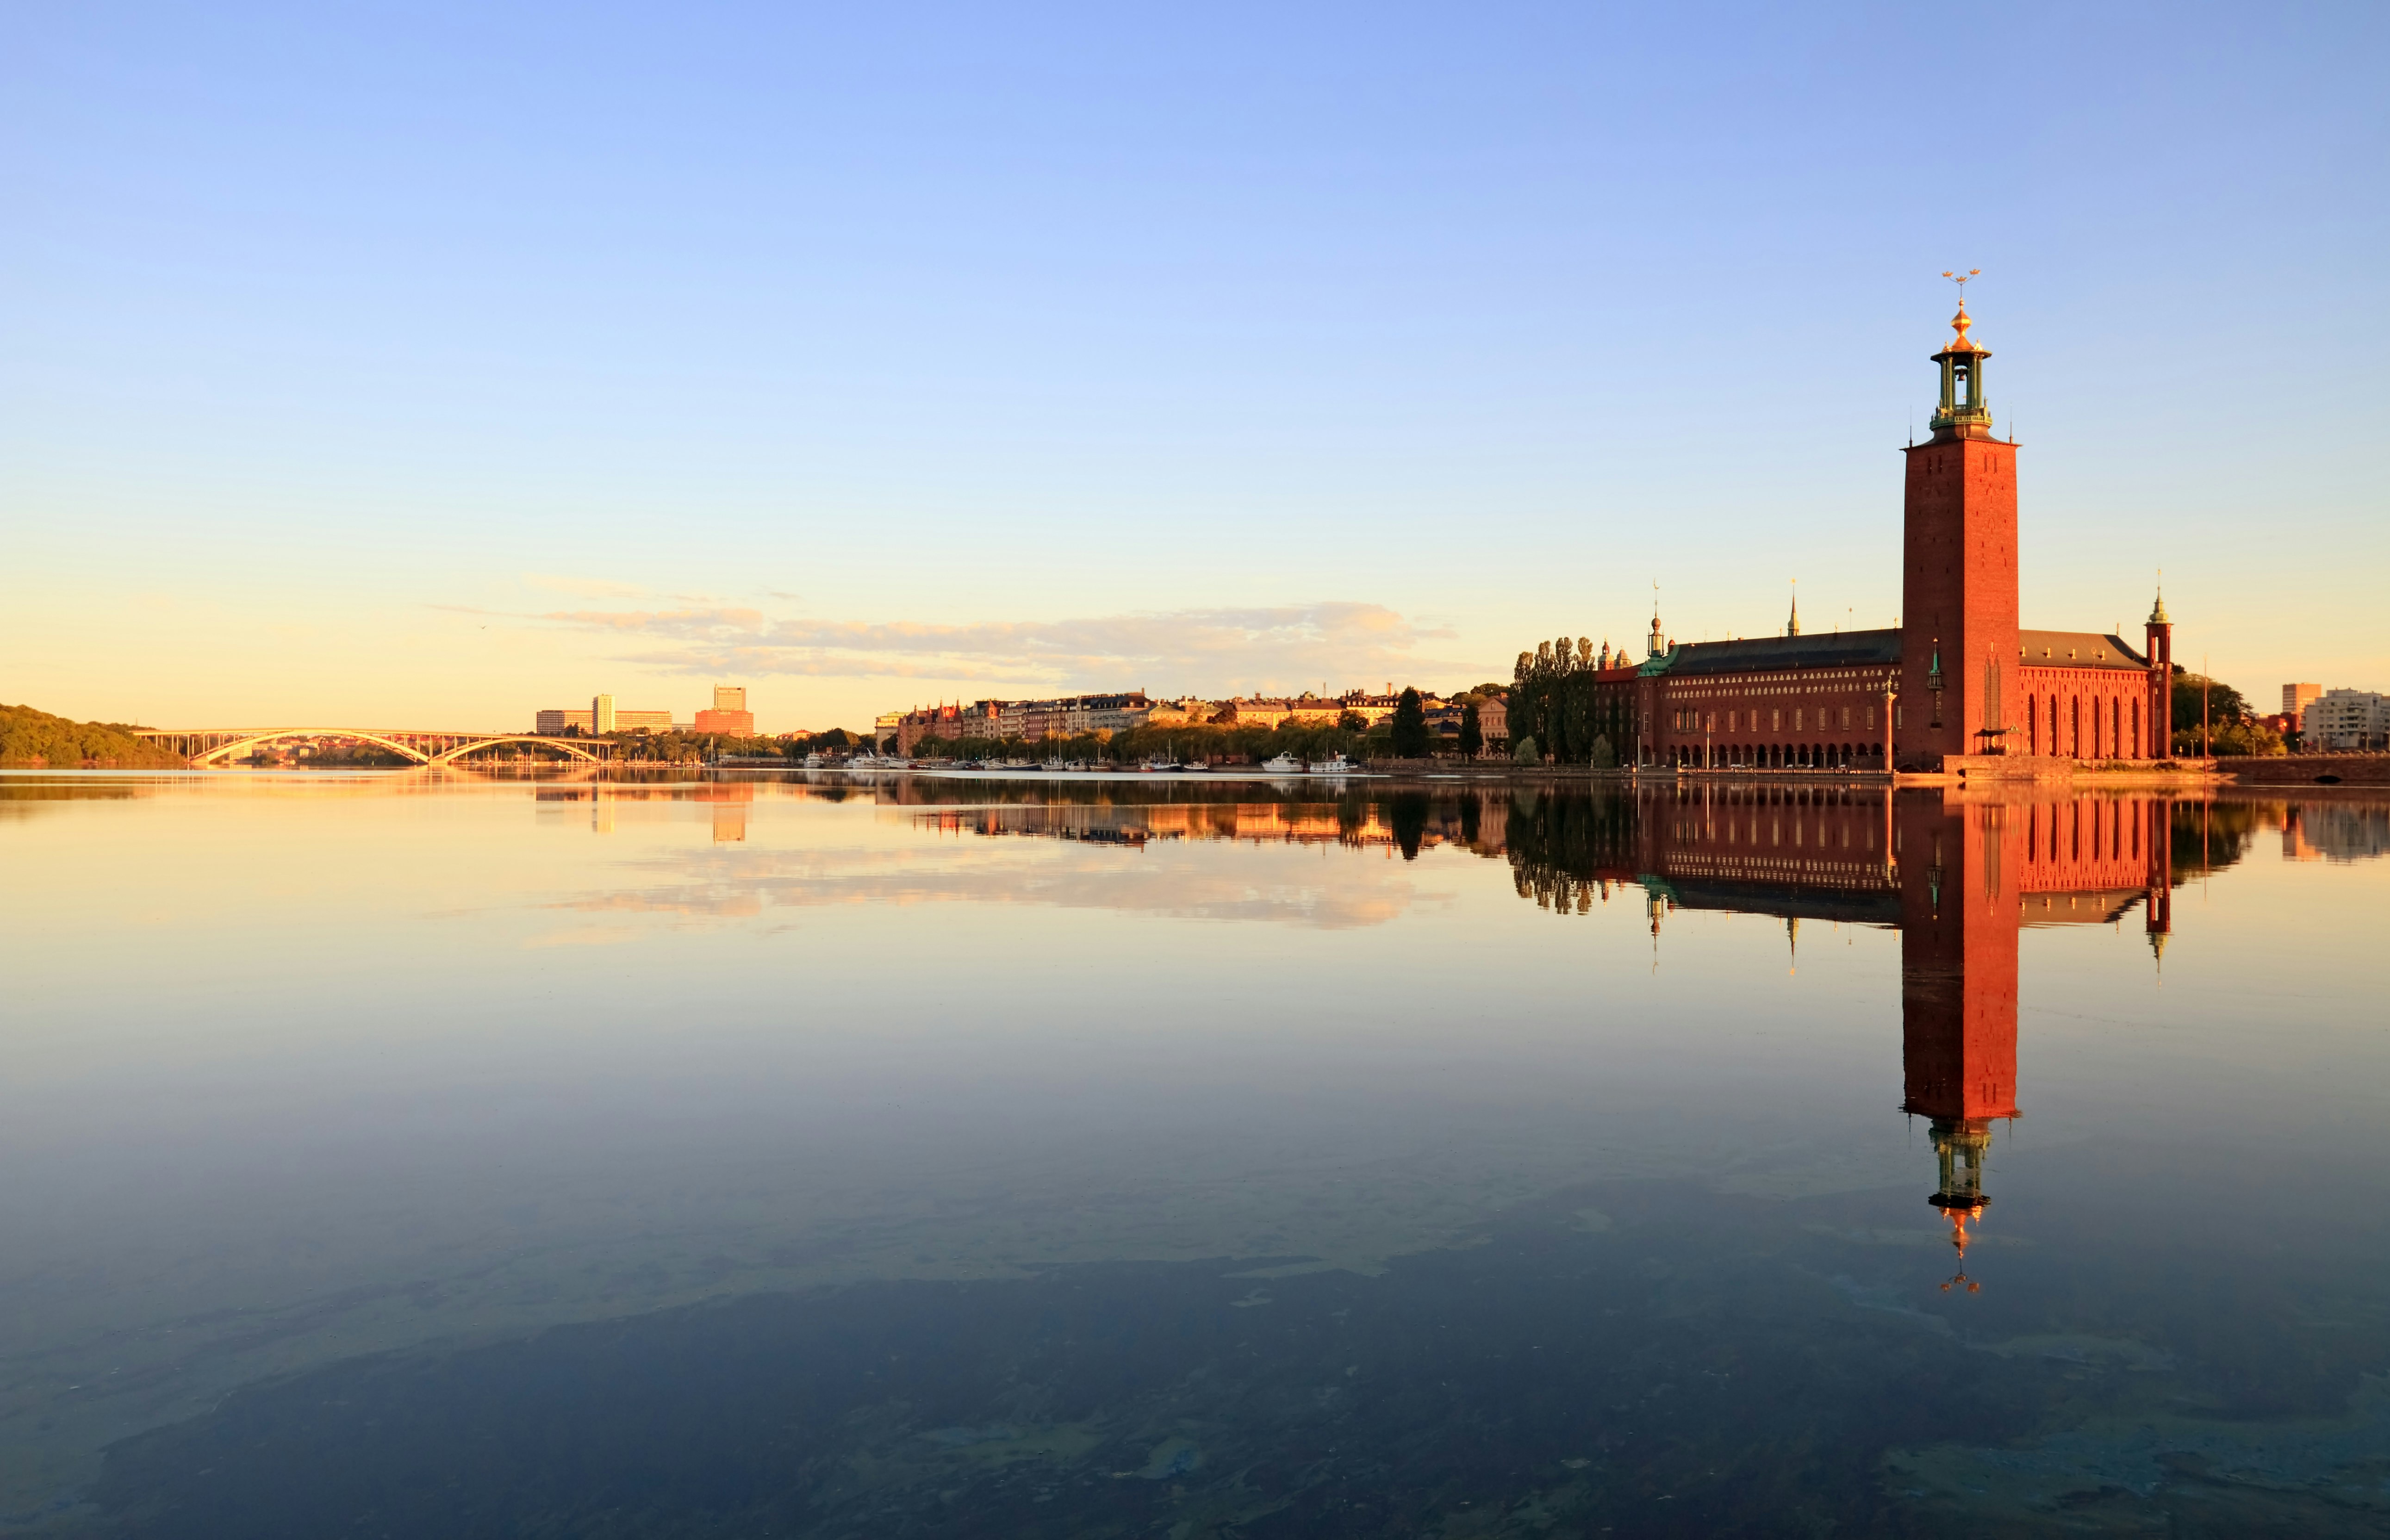 Stockholm City Hall with reflection on water